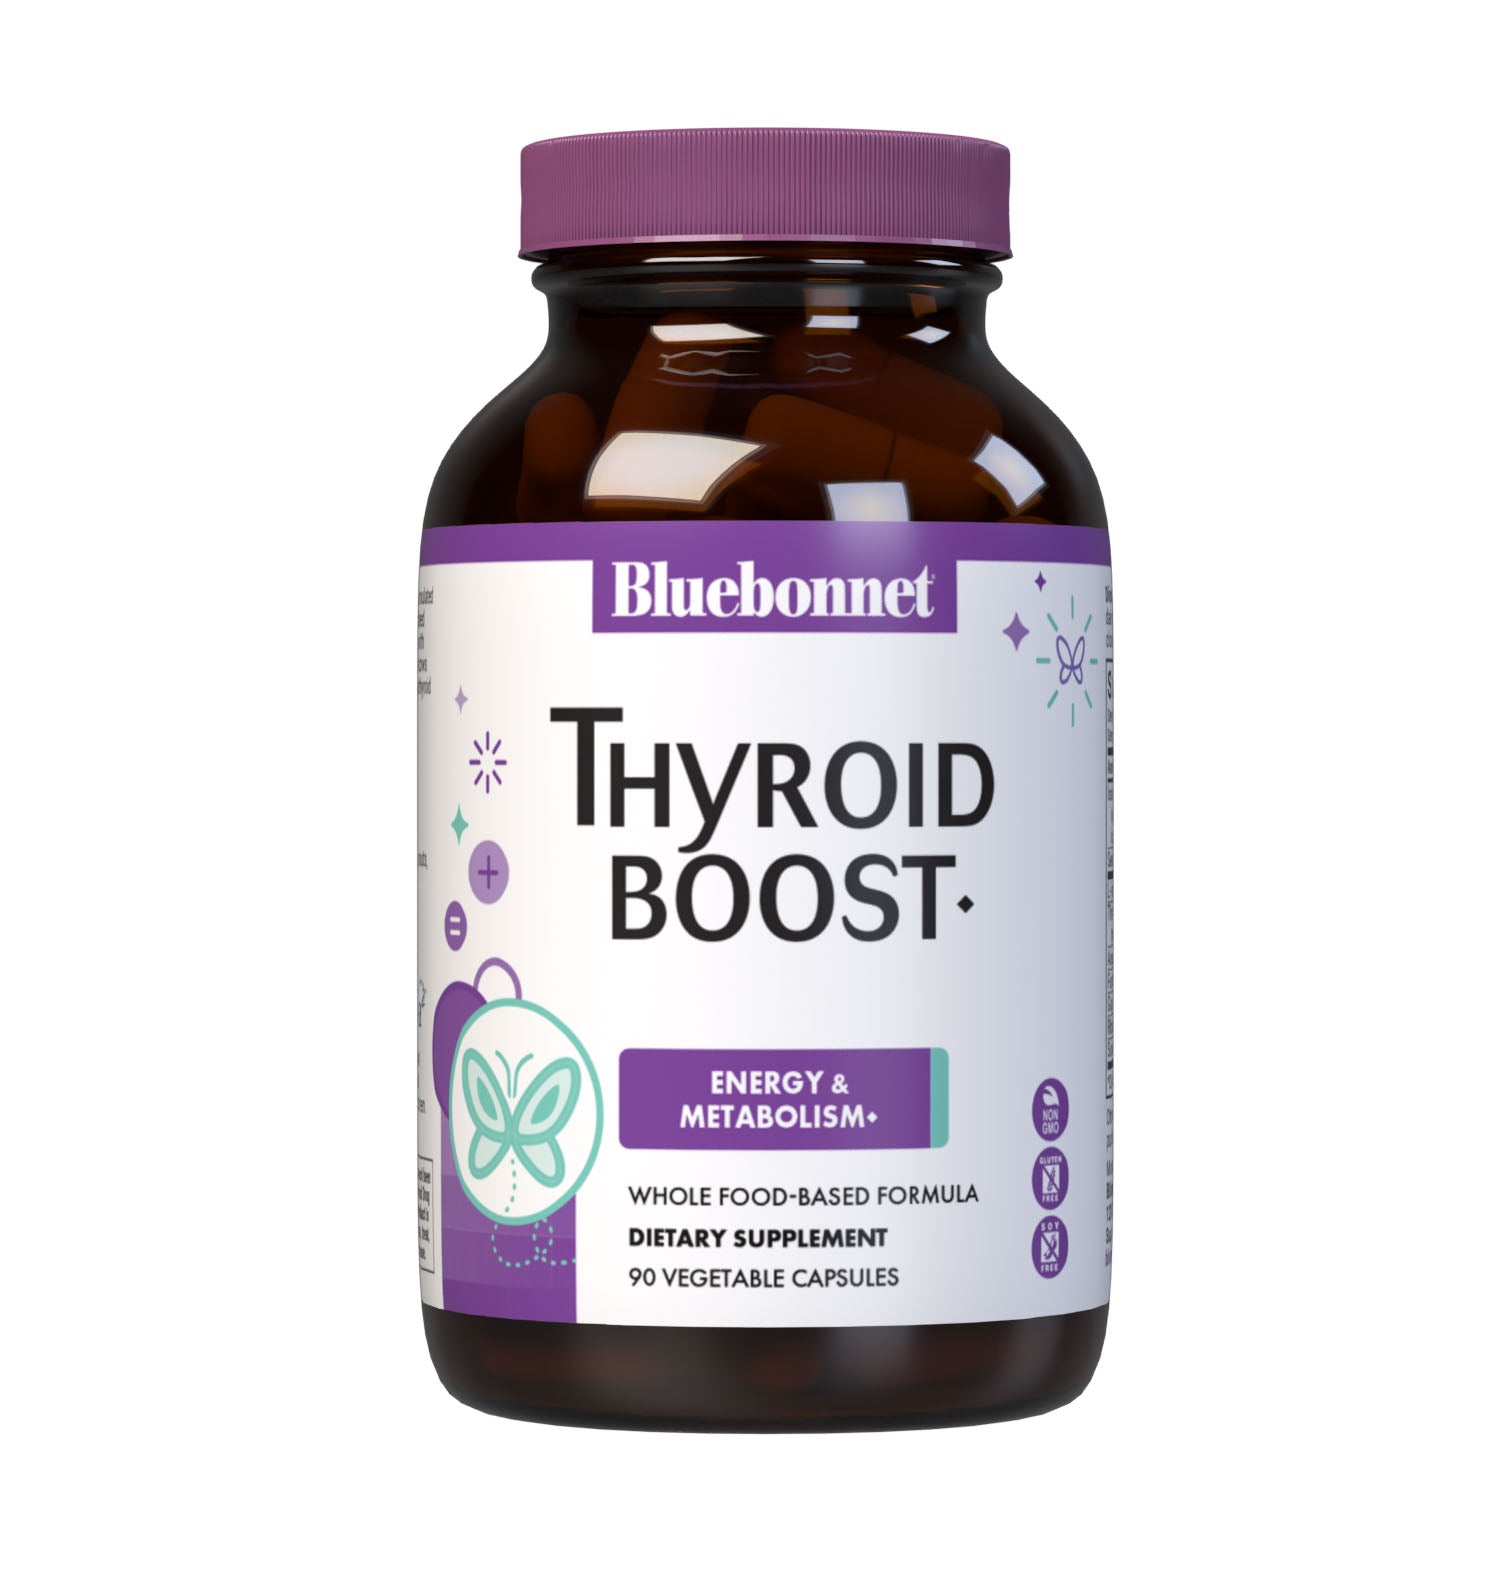 Bluebonnet’s Targeted Choice Thyroid Boost 90 Vegetable Capsules are specially formulated with unique, sustainably harvested or wildcrafted botanical extracts, free-form L-tyrosine, as well as iodine from a proprietary blend of glandular powder, potassium iodide and brown seaweeds to help maintain healthy thyroid hormone levels that are within the normal range.  #size_90 count